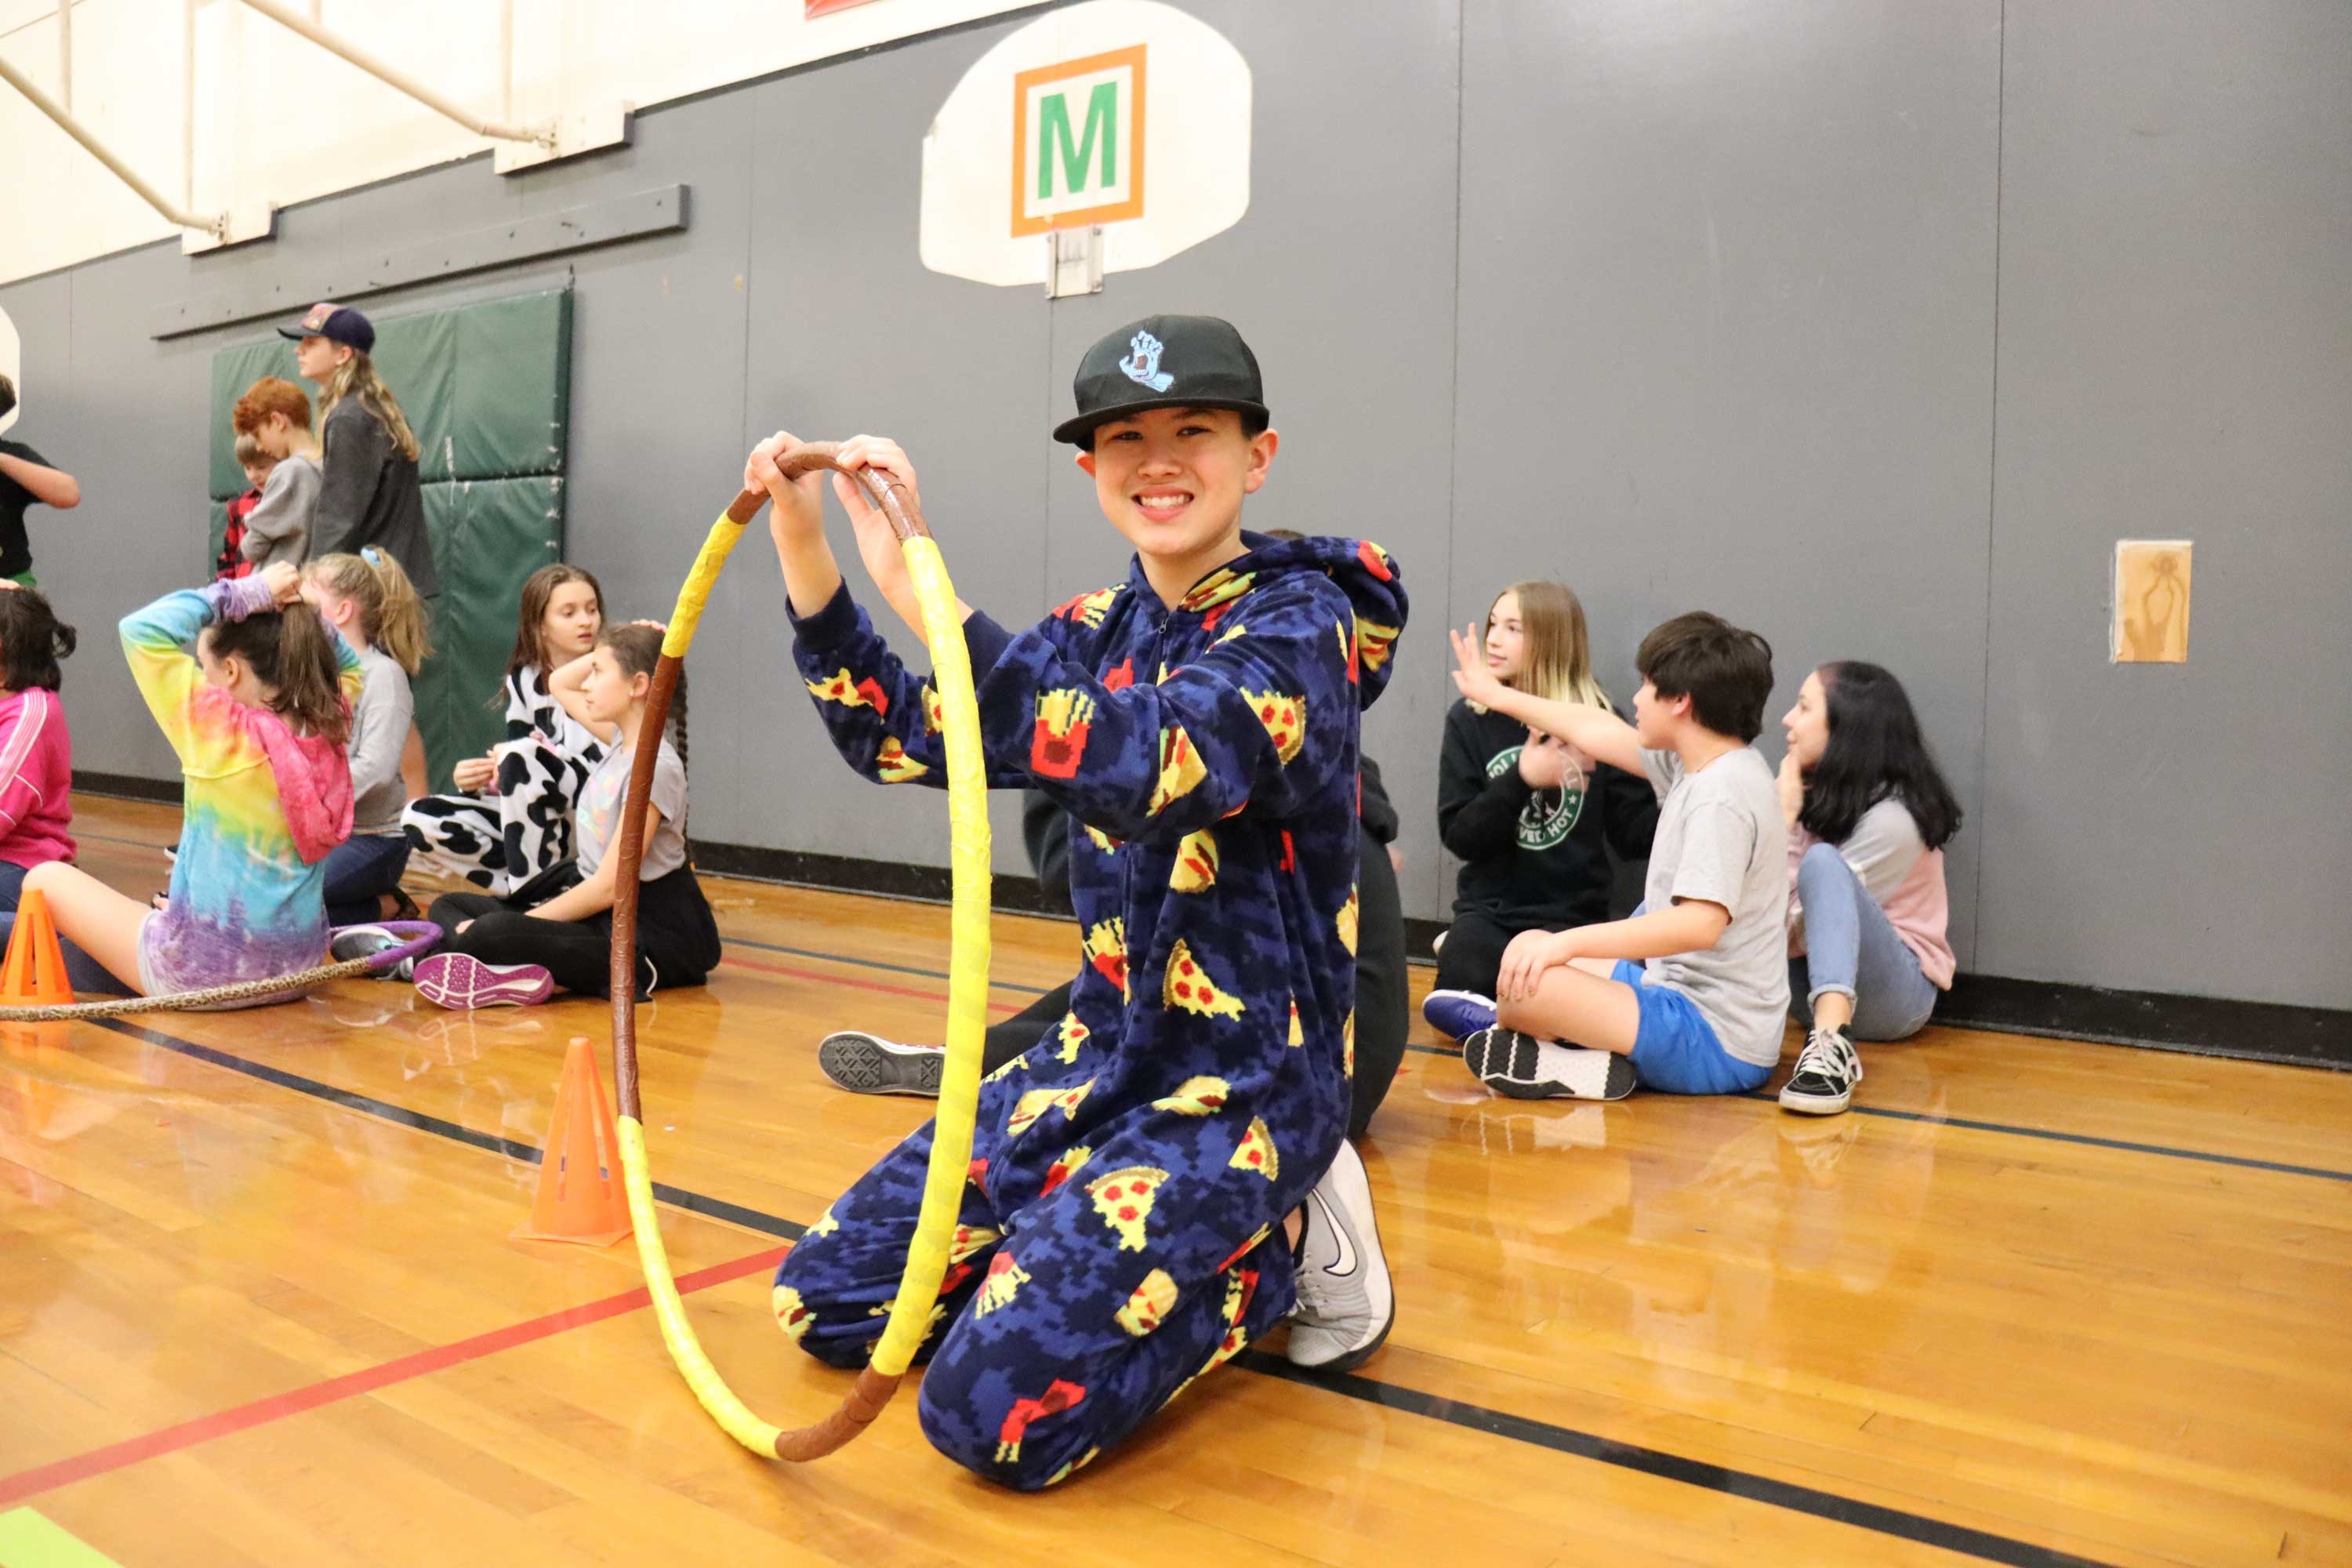 youth with hula hoop in the eugene ymca gym during middle school madness